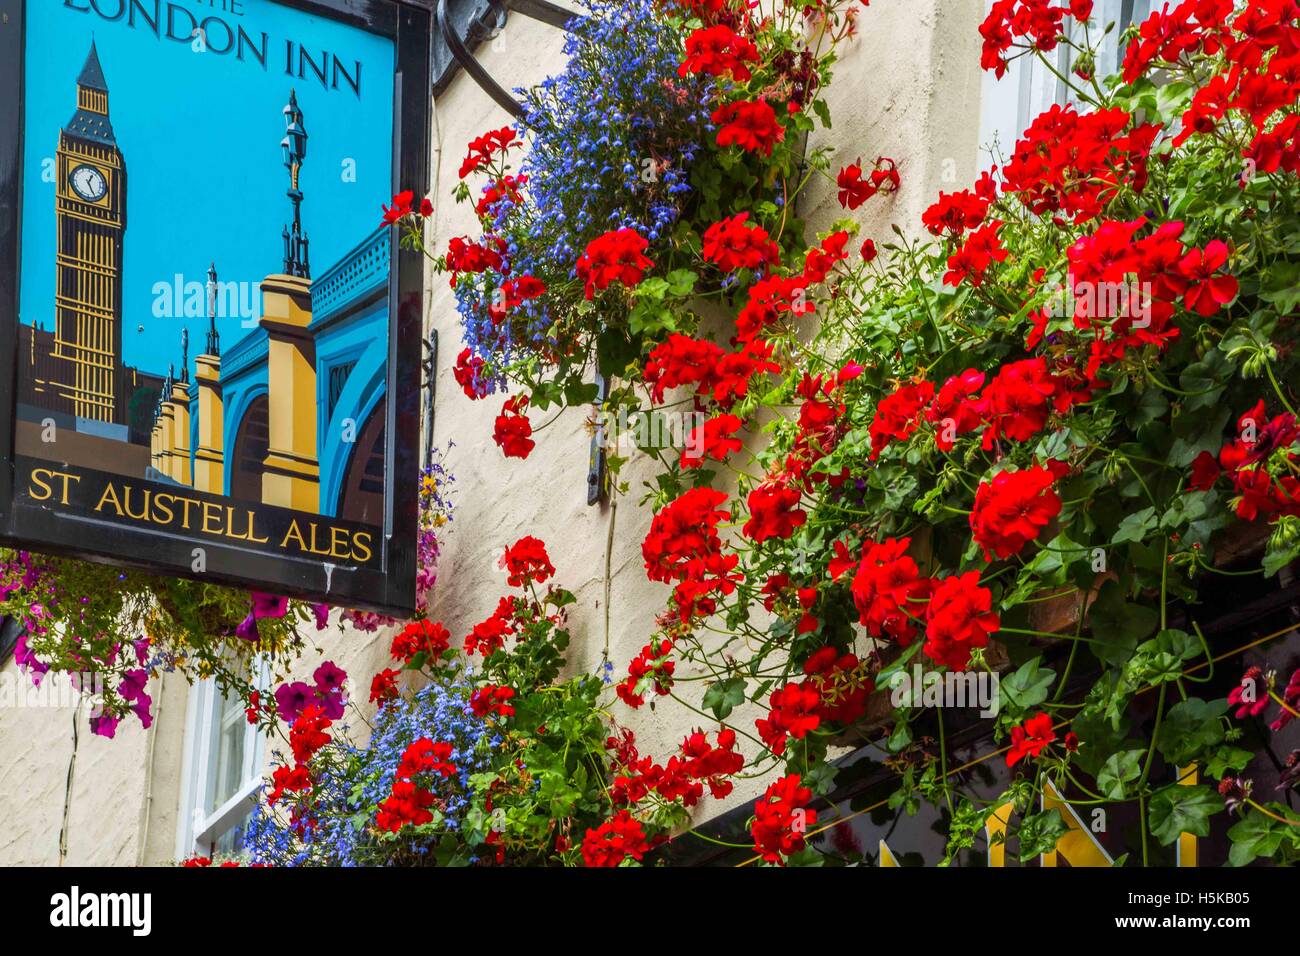 a pub sign in Padstow, Cornwall - The London Inn with white walls and red and blue hanging baskets outside Stock Photo